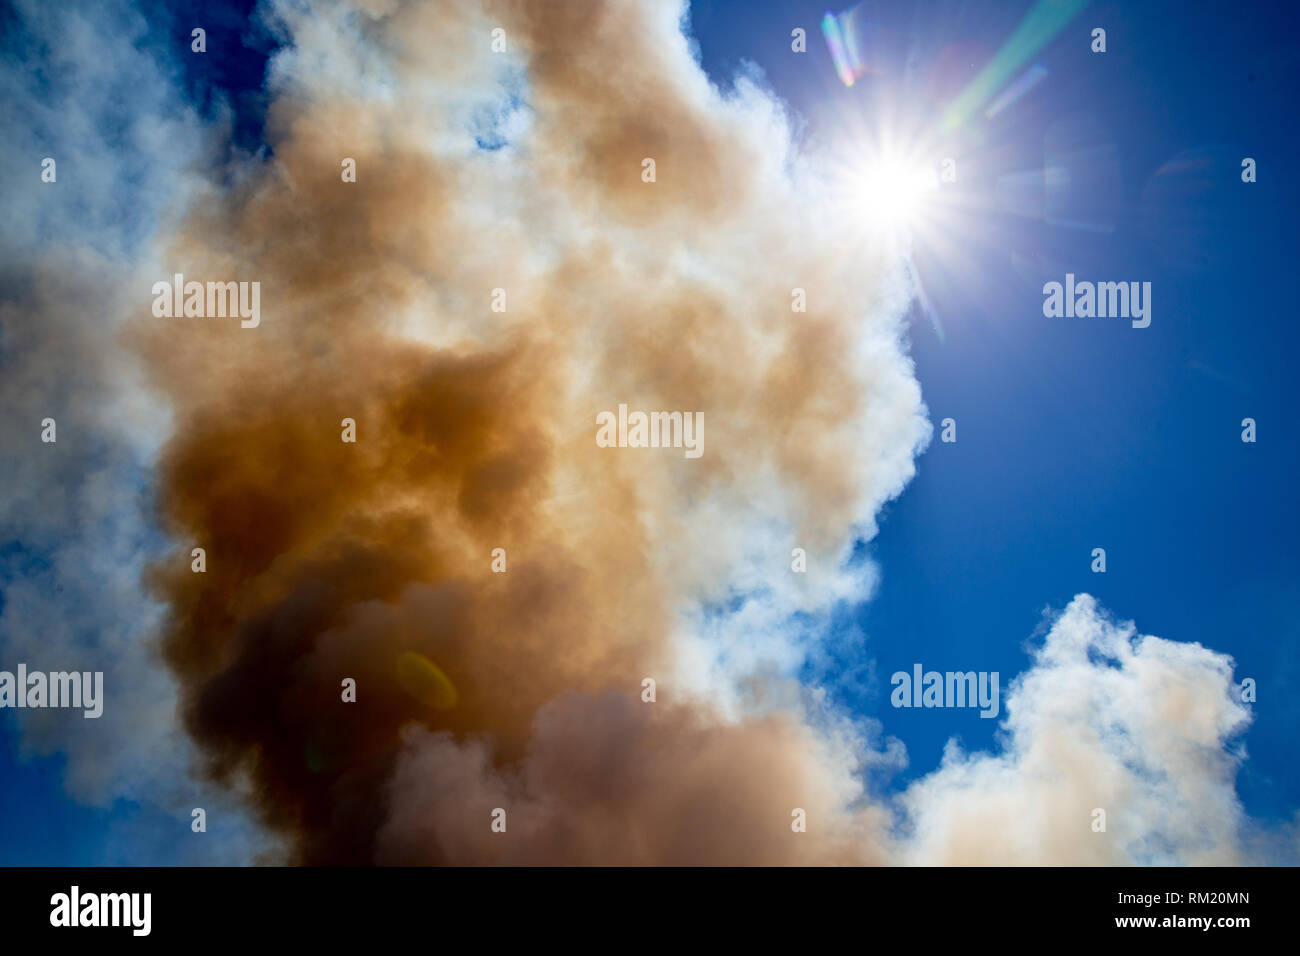 The dramatic smoke from a stubble fire on a farm billows up towards the afternoon sun in the sky Stock Photo